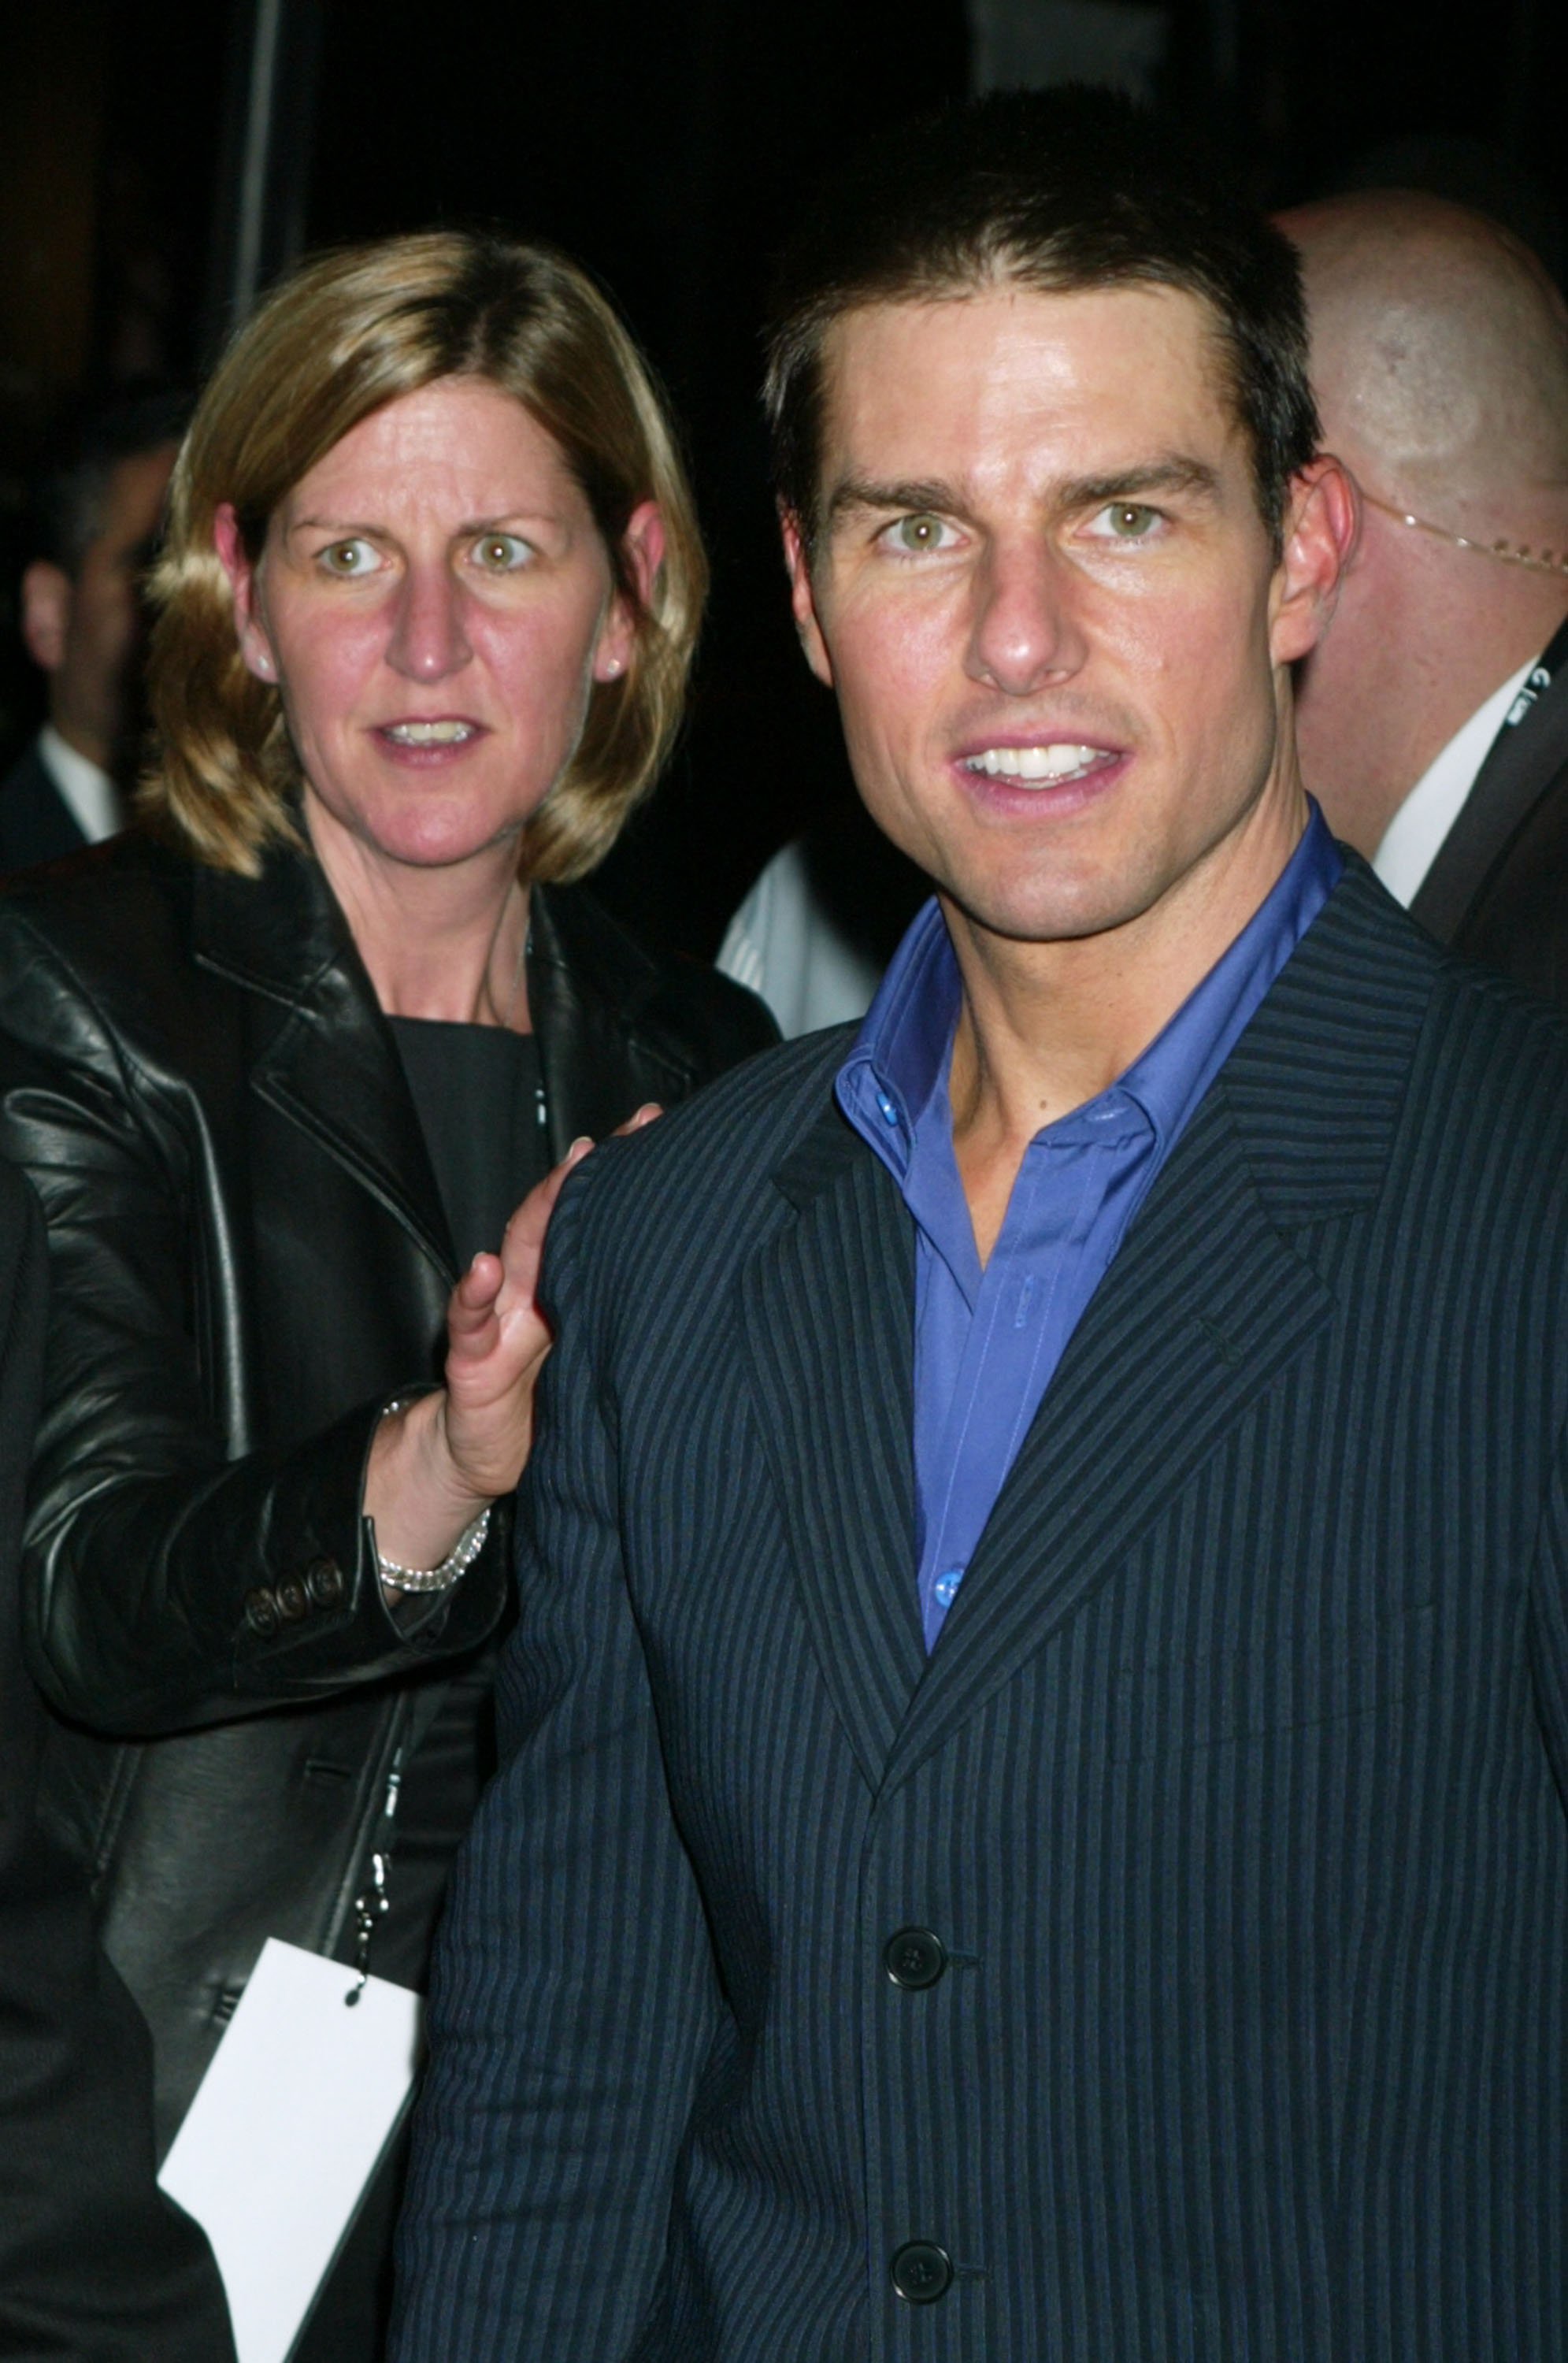 does tom cruise have a brother that is an actor